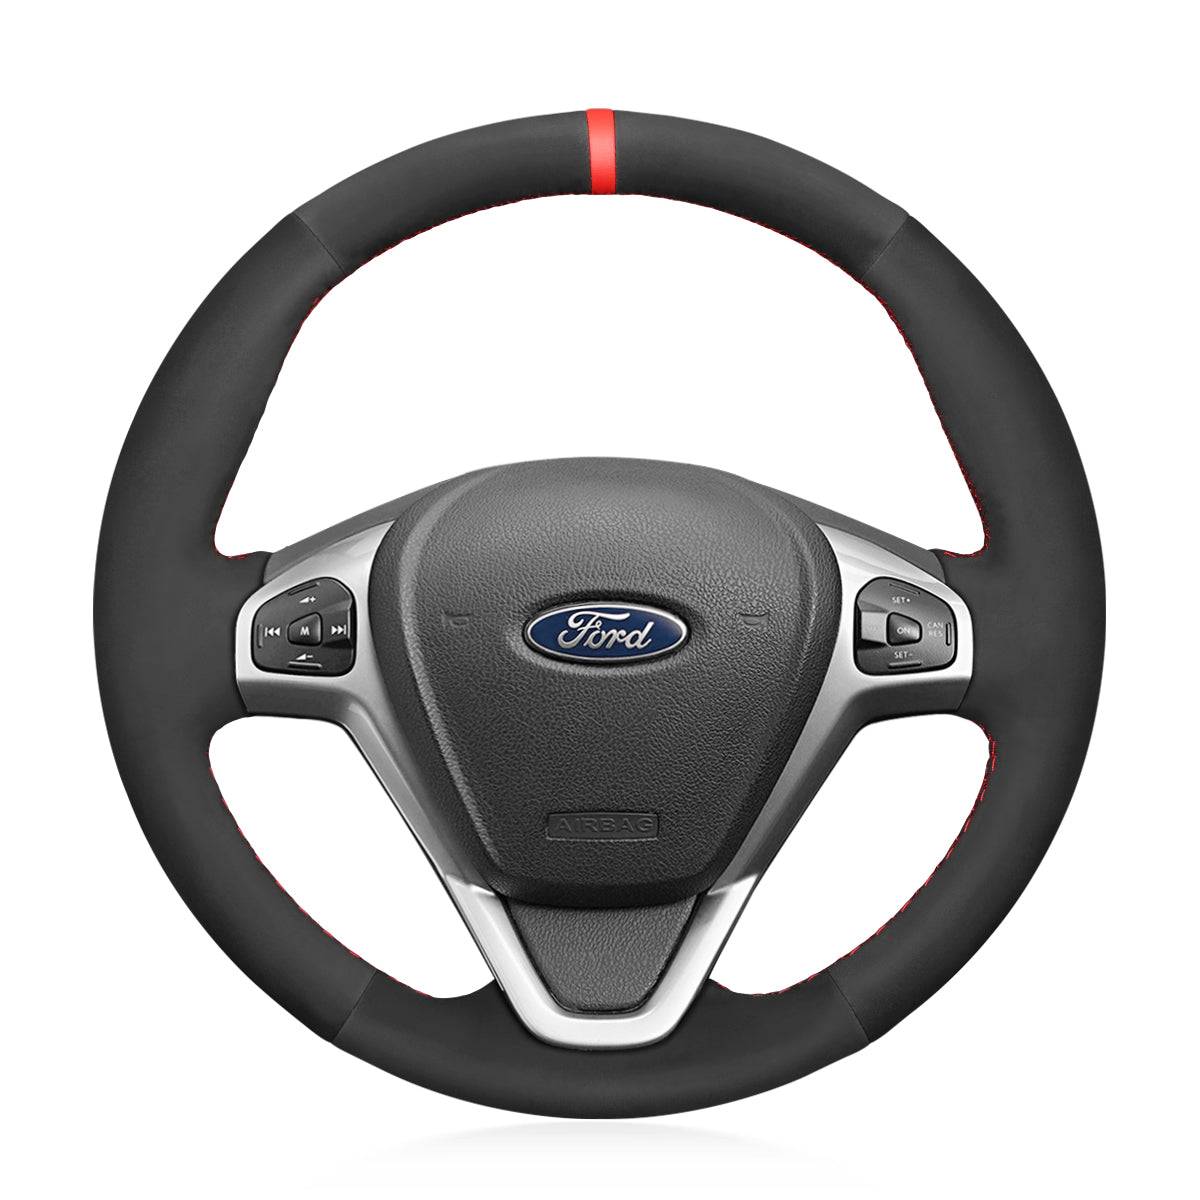 MEWANT Hand Stitch Car Steering Wheel Cover for Ford Fiesta 2008-2017 / EcoSport 2014-2017